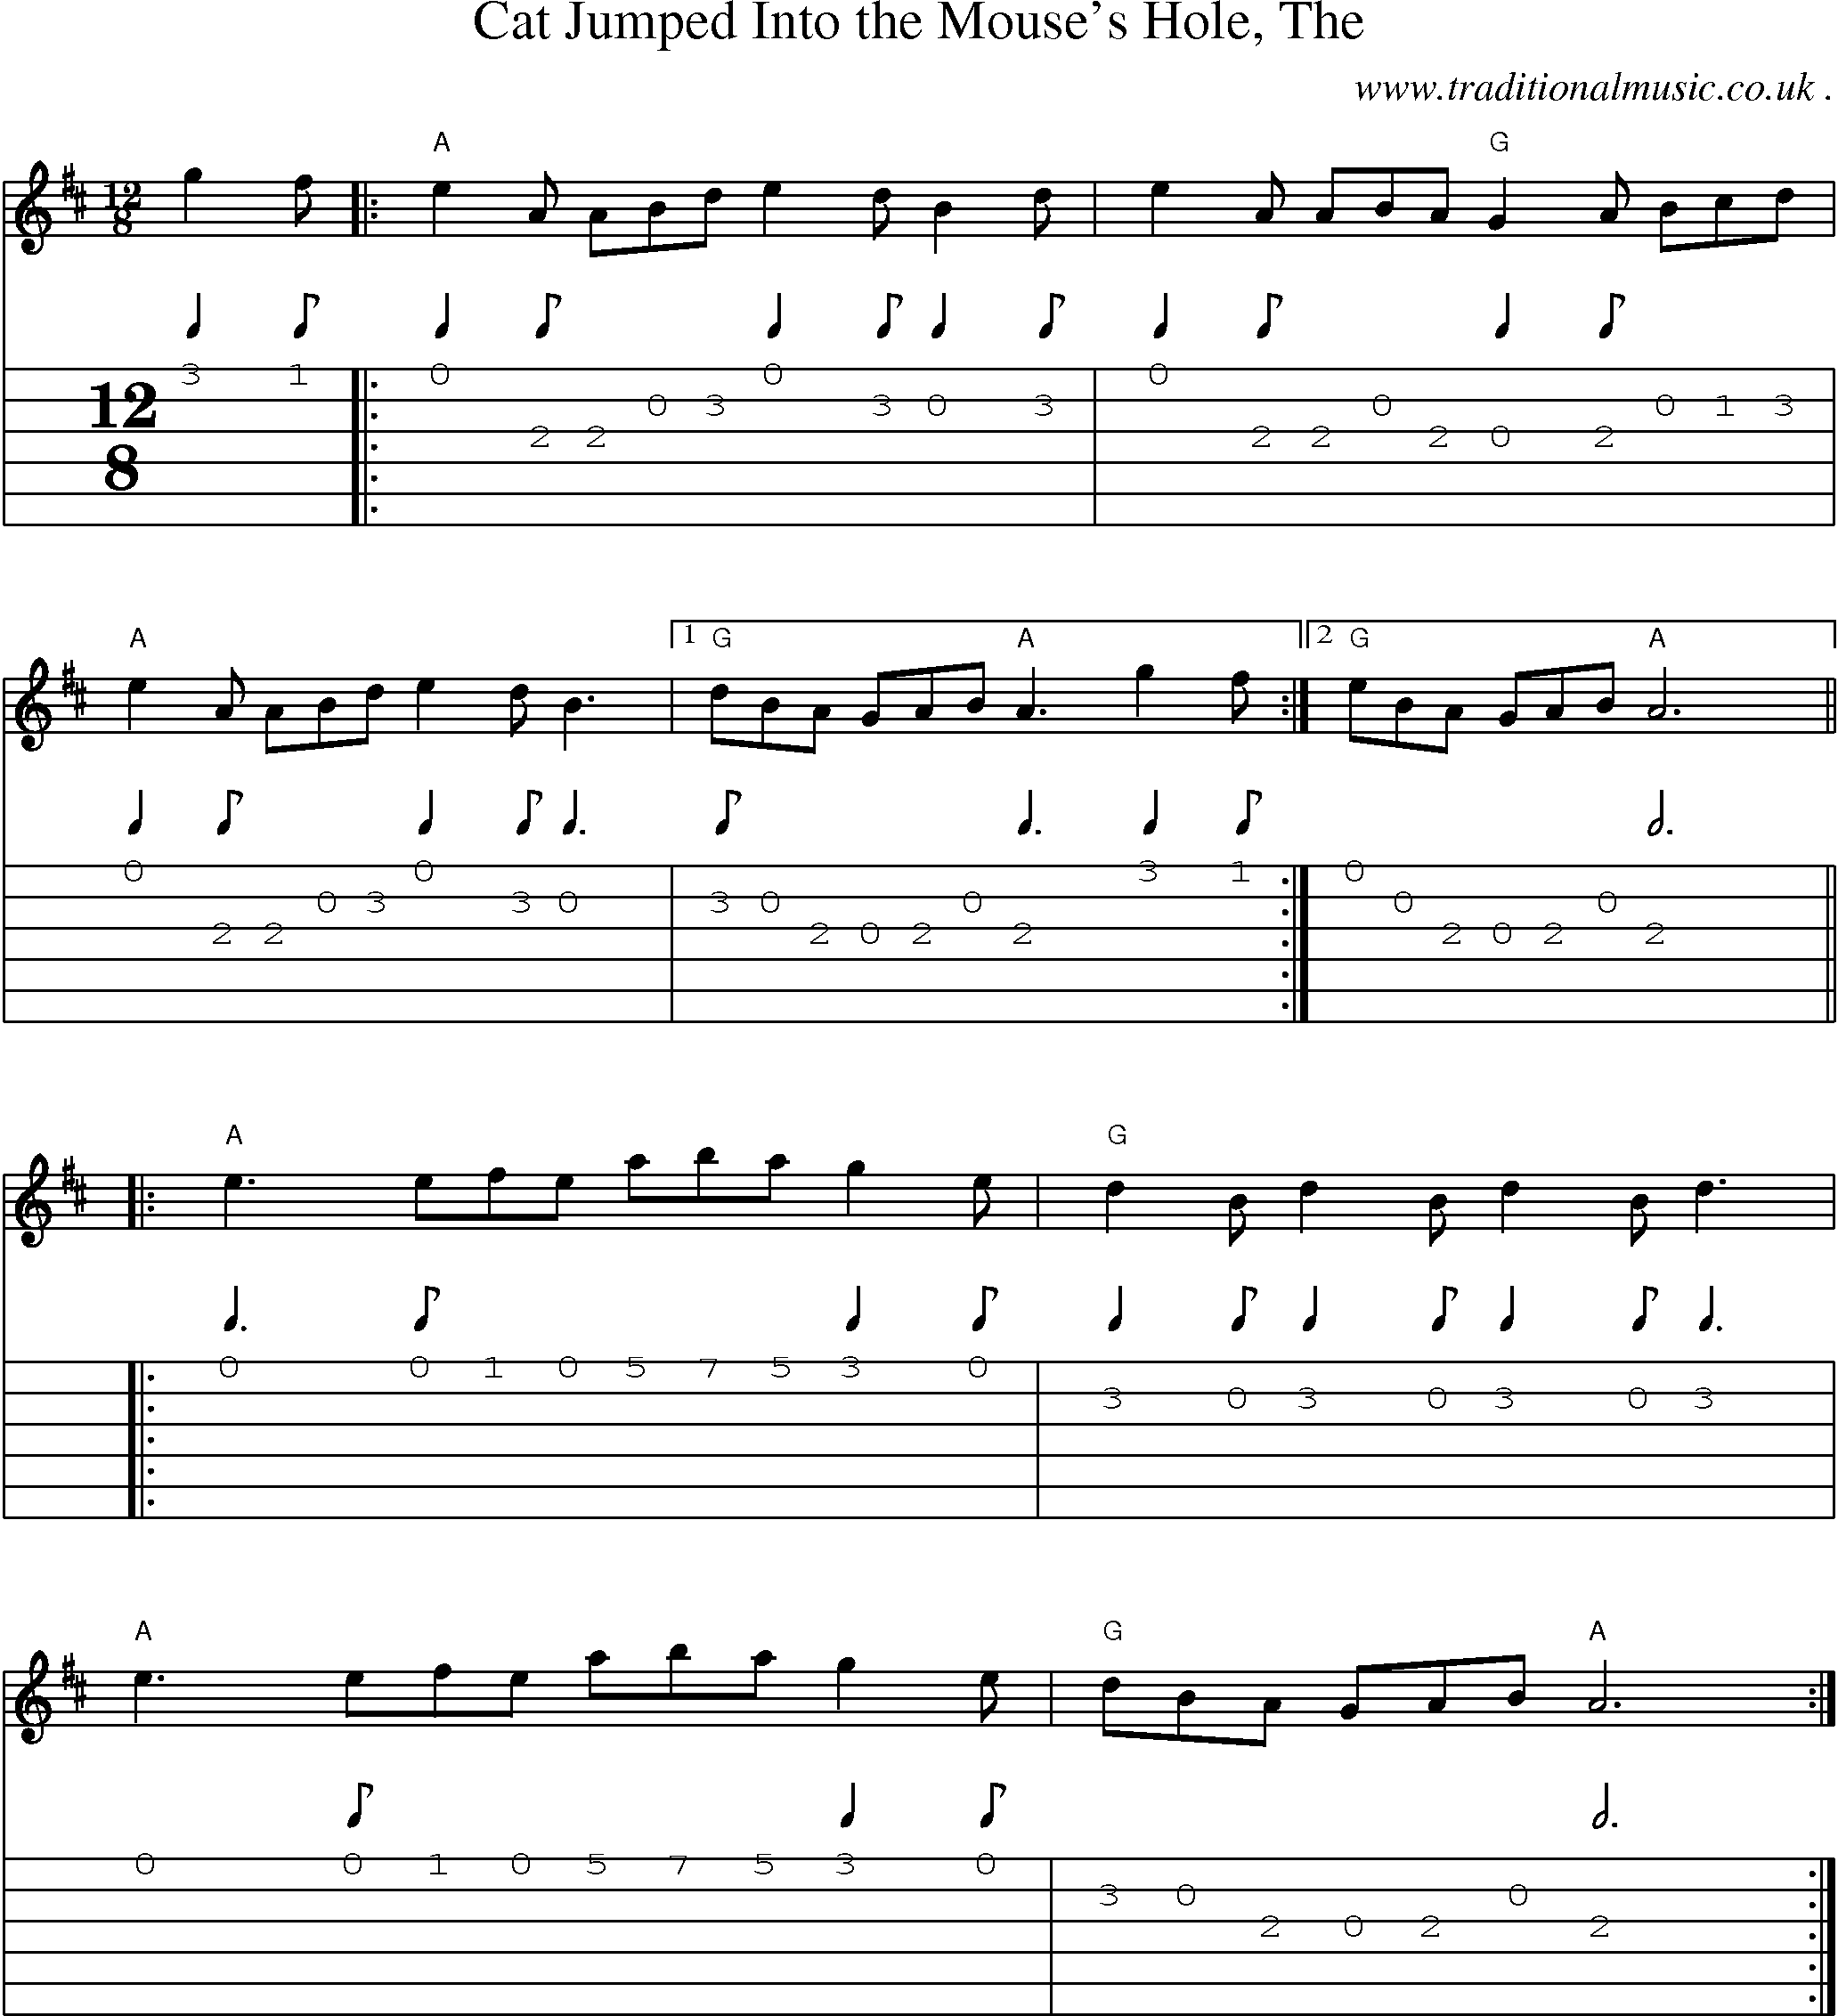 Music Score and Guitar Tabs for Cat Jumped Into The Mouses Hole